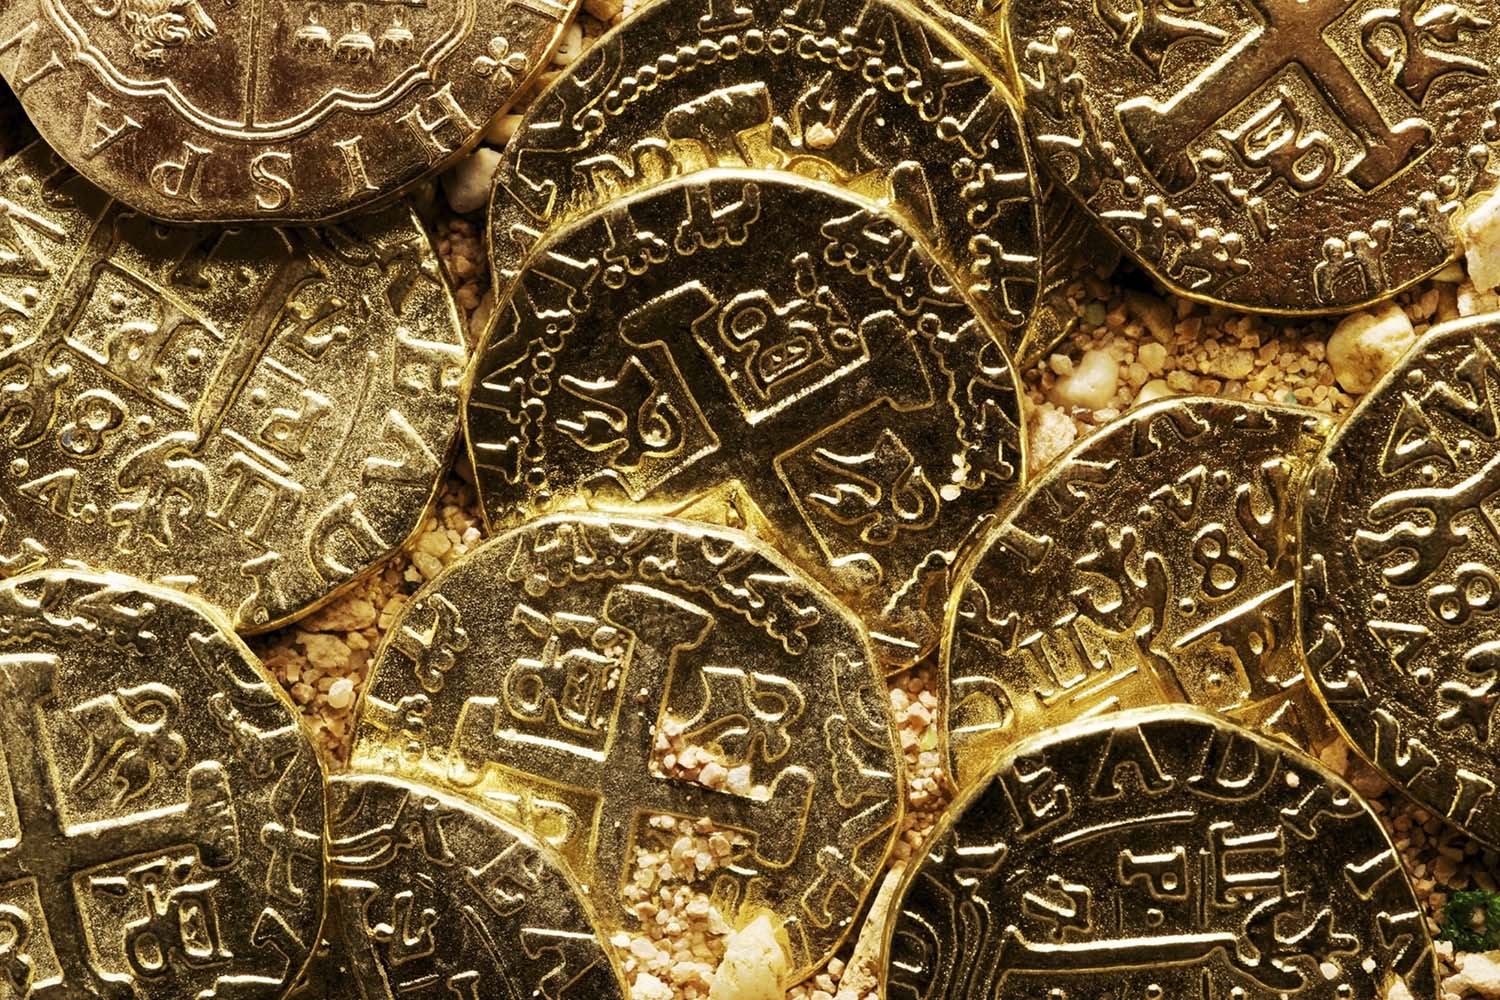 Are Gold Doubloons Real?